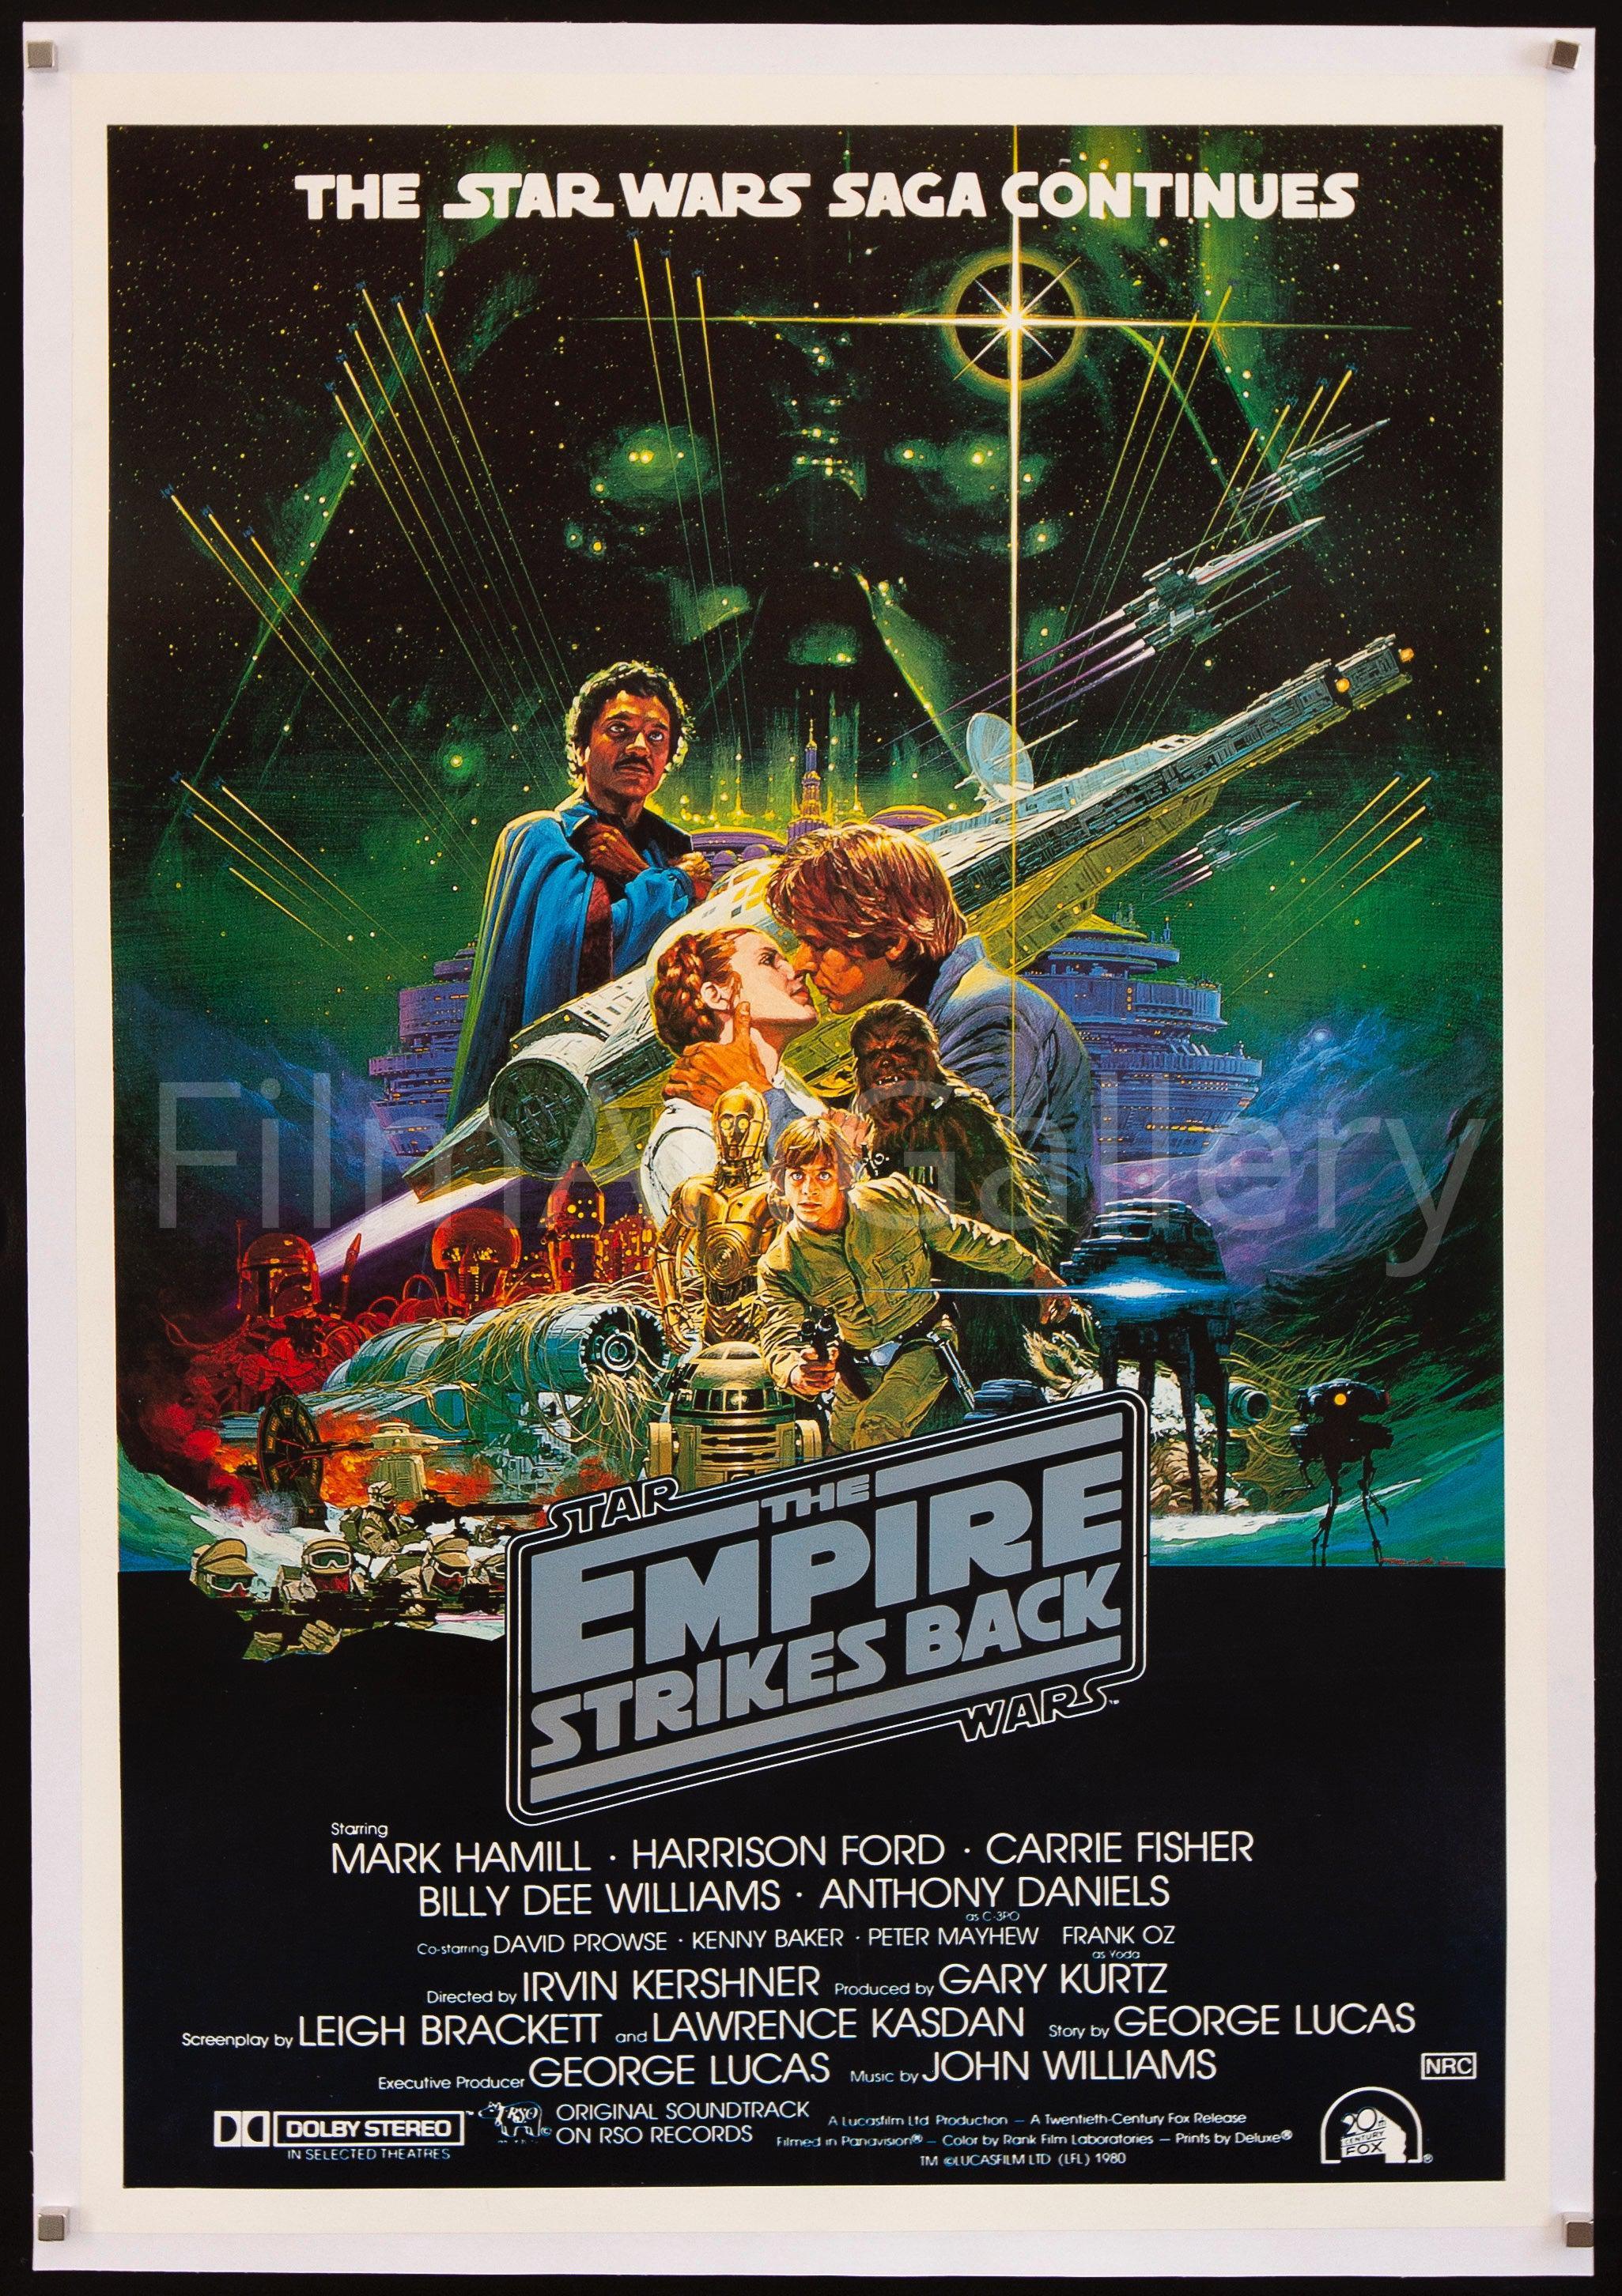 The Empire Strikes Back Movie Poster 1980 1 Sheet (27x41)